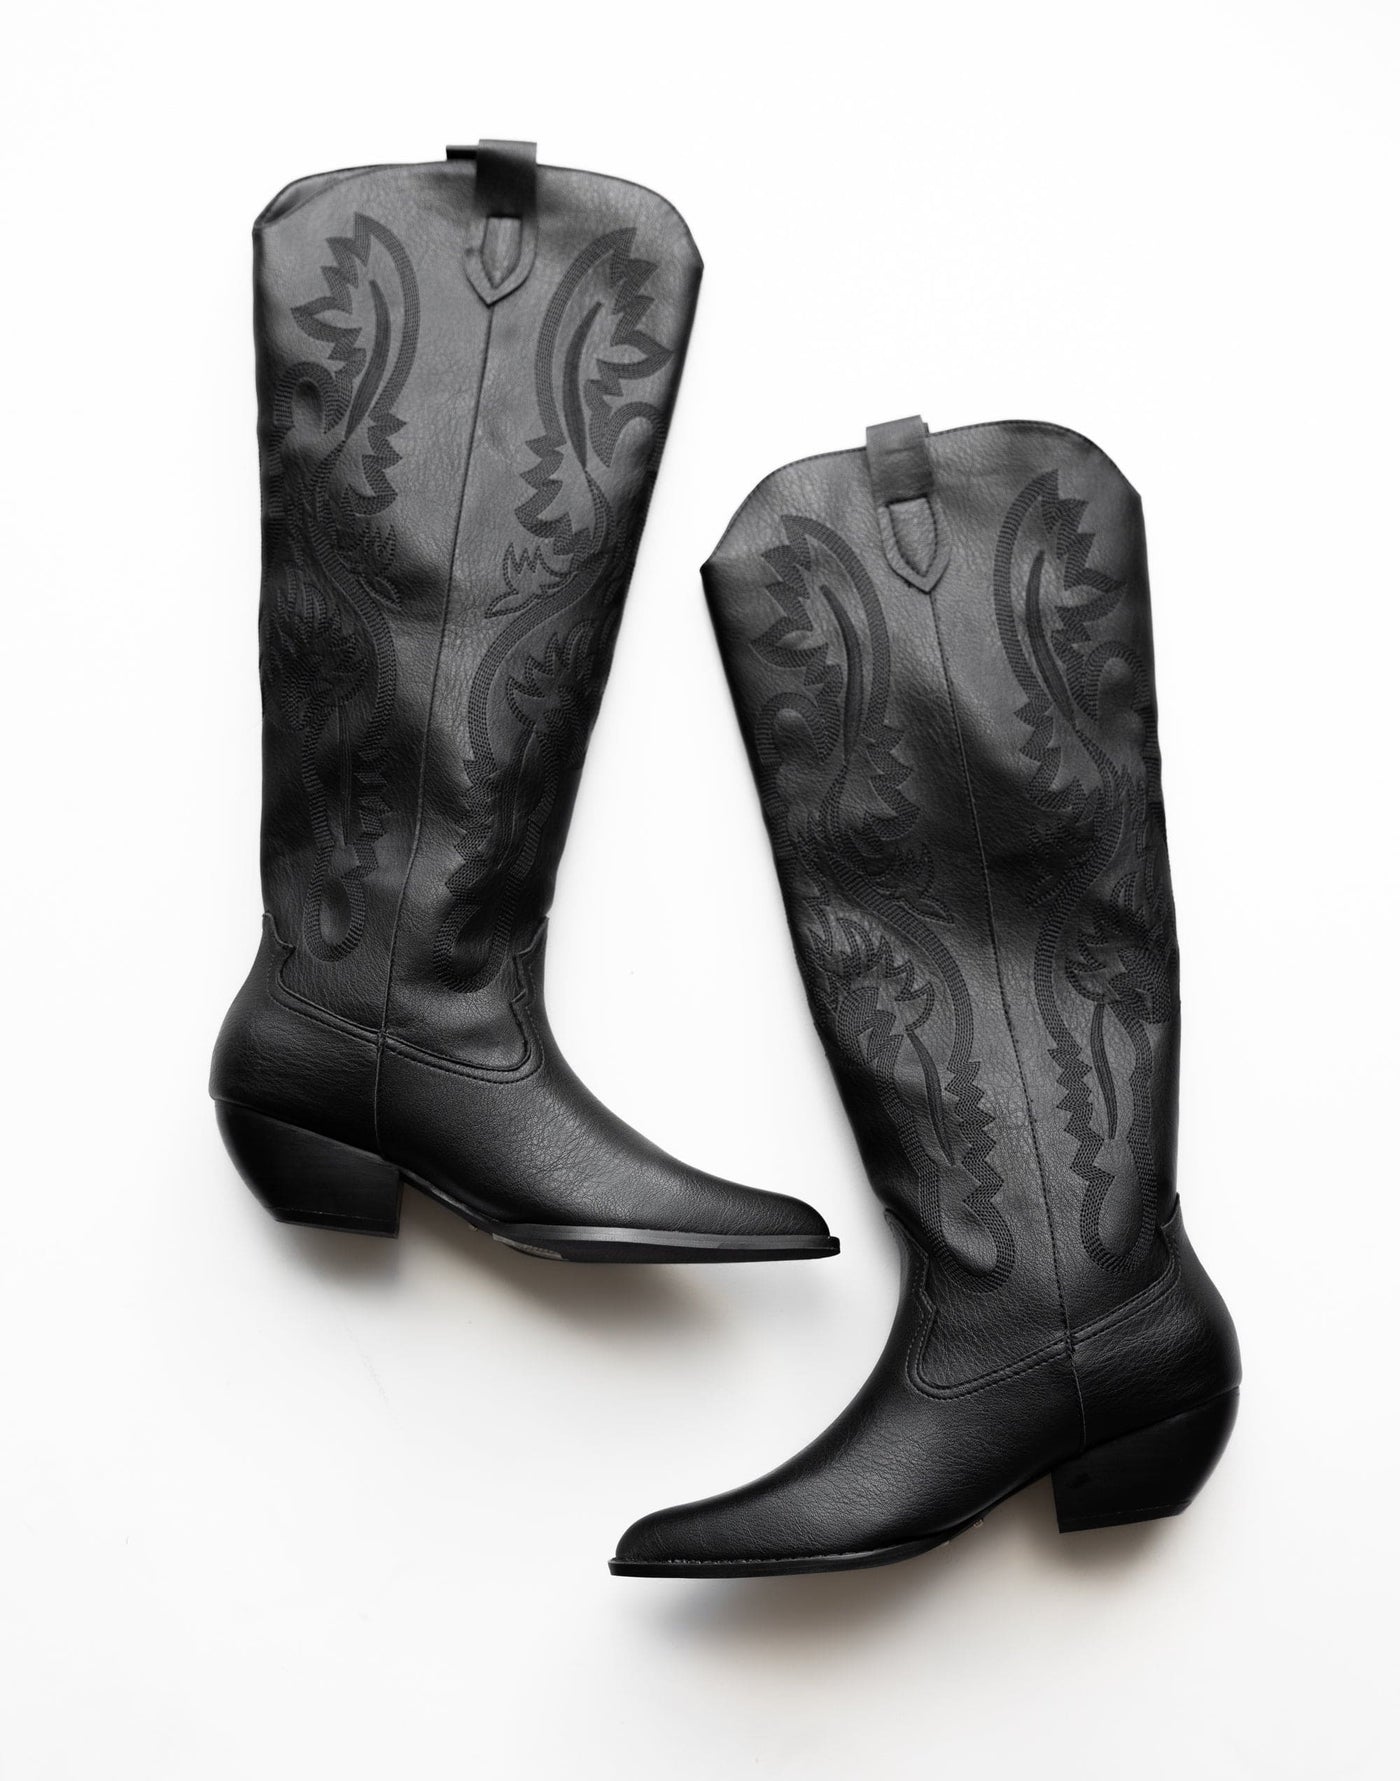 Wilden Boots (Black) - By Billini - High Western Pointed Toe Cowboy Boot - Women's Shoes - Charcoal Clothing